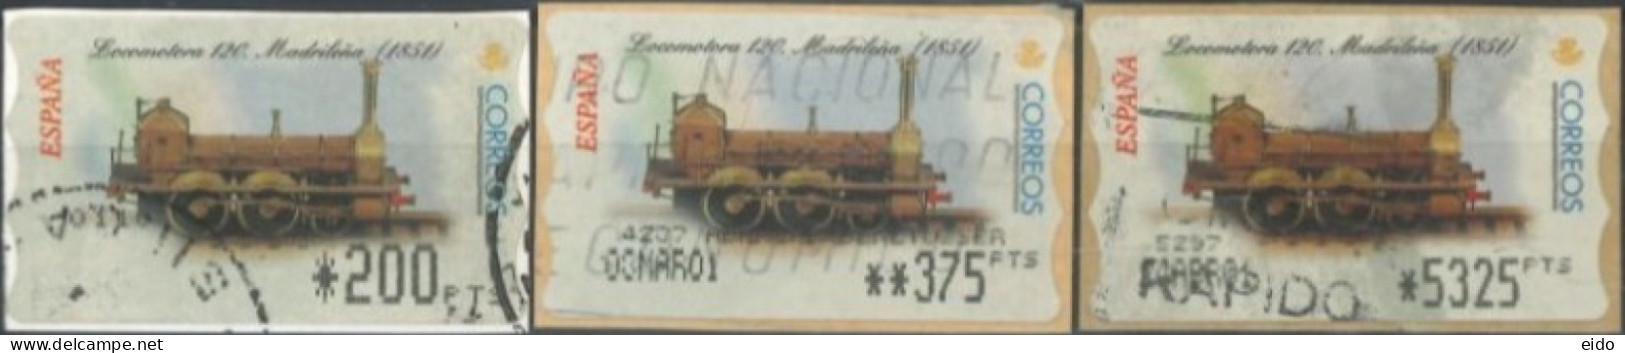 SPAIN- 2001, LOCOMOTIVES STAMPS LABELS SET OF 3, DIFFERENT VALUES, USED. - Gebraucht